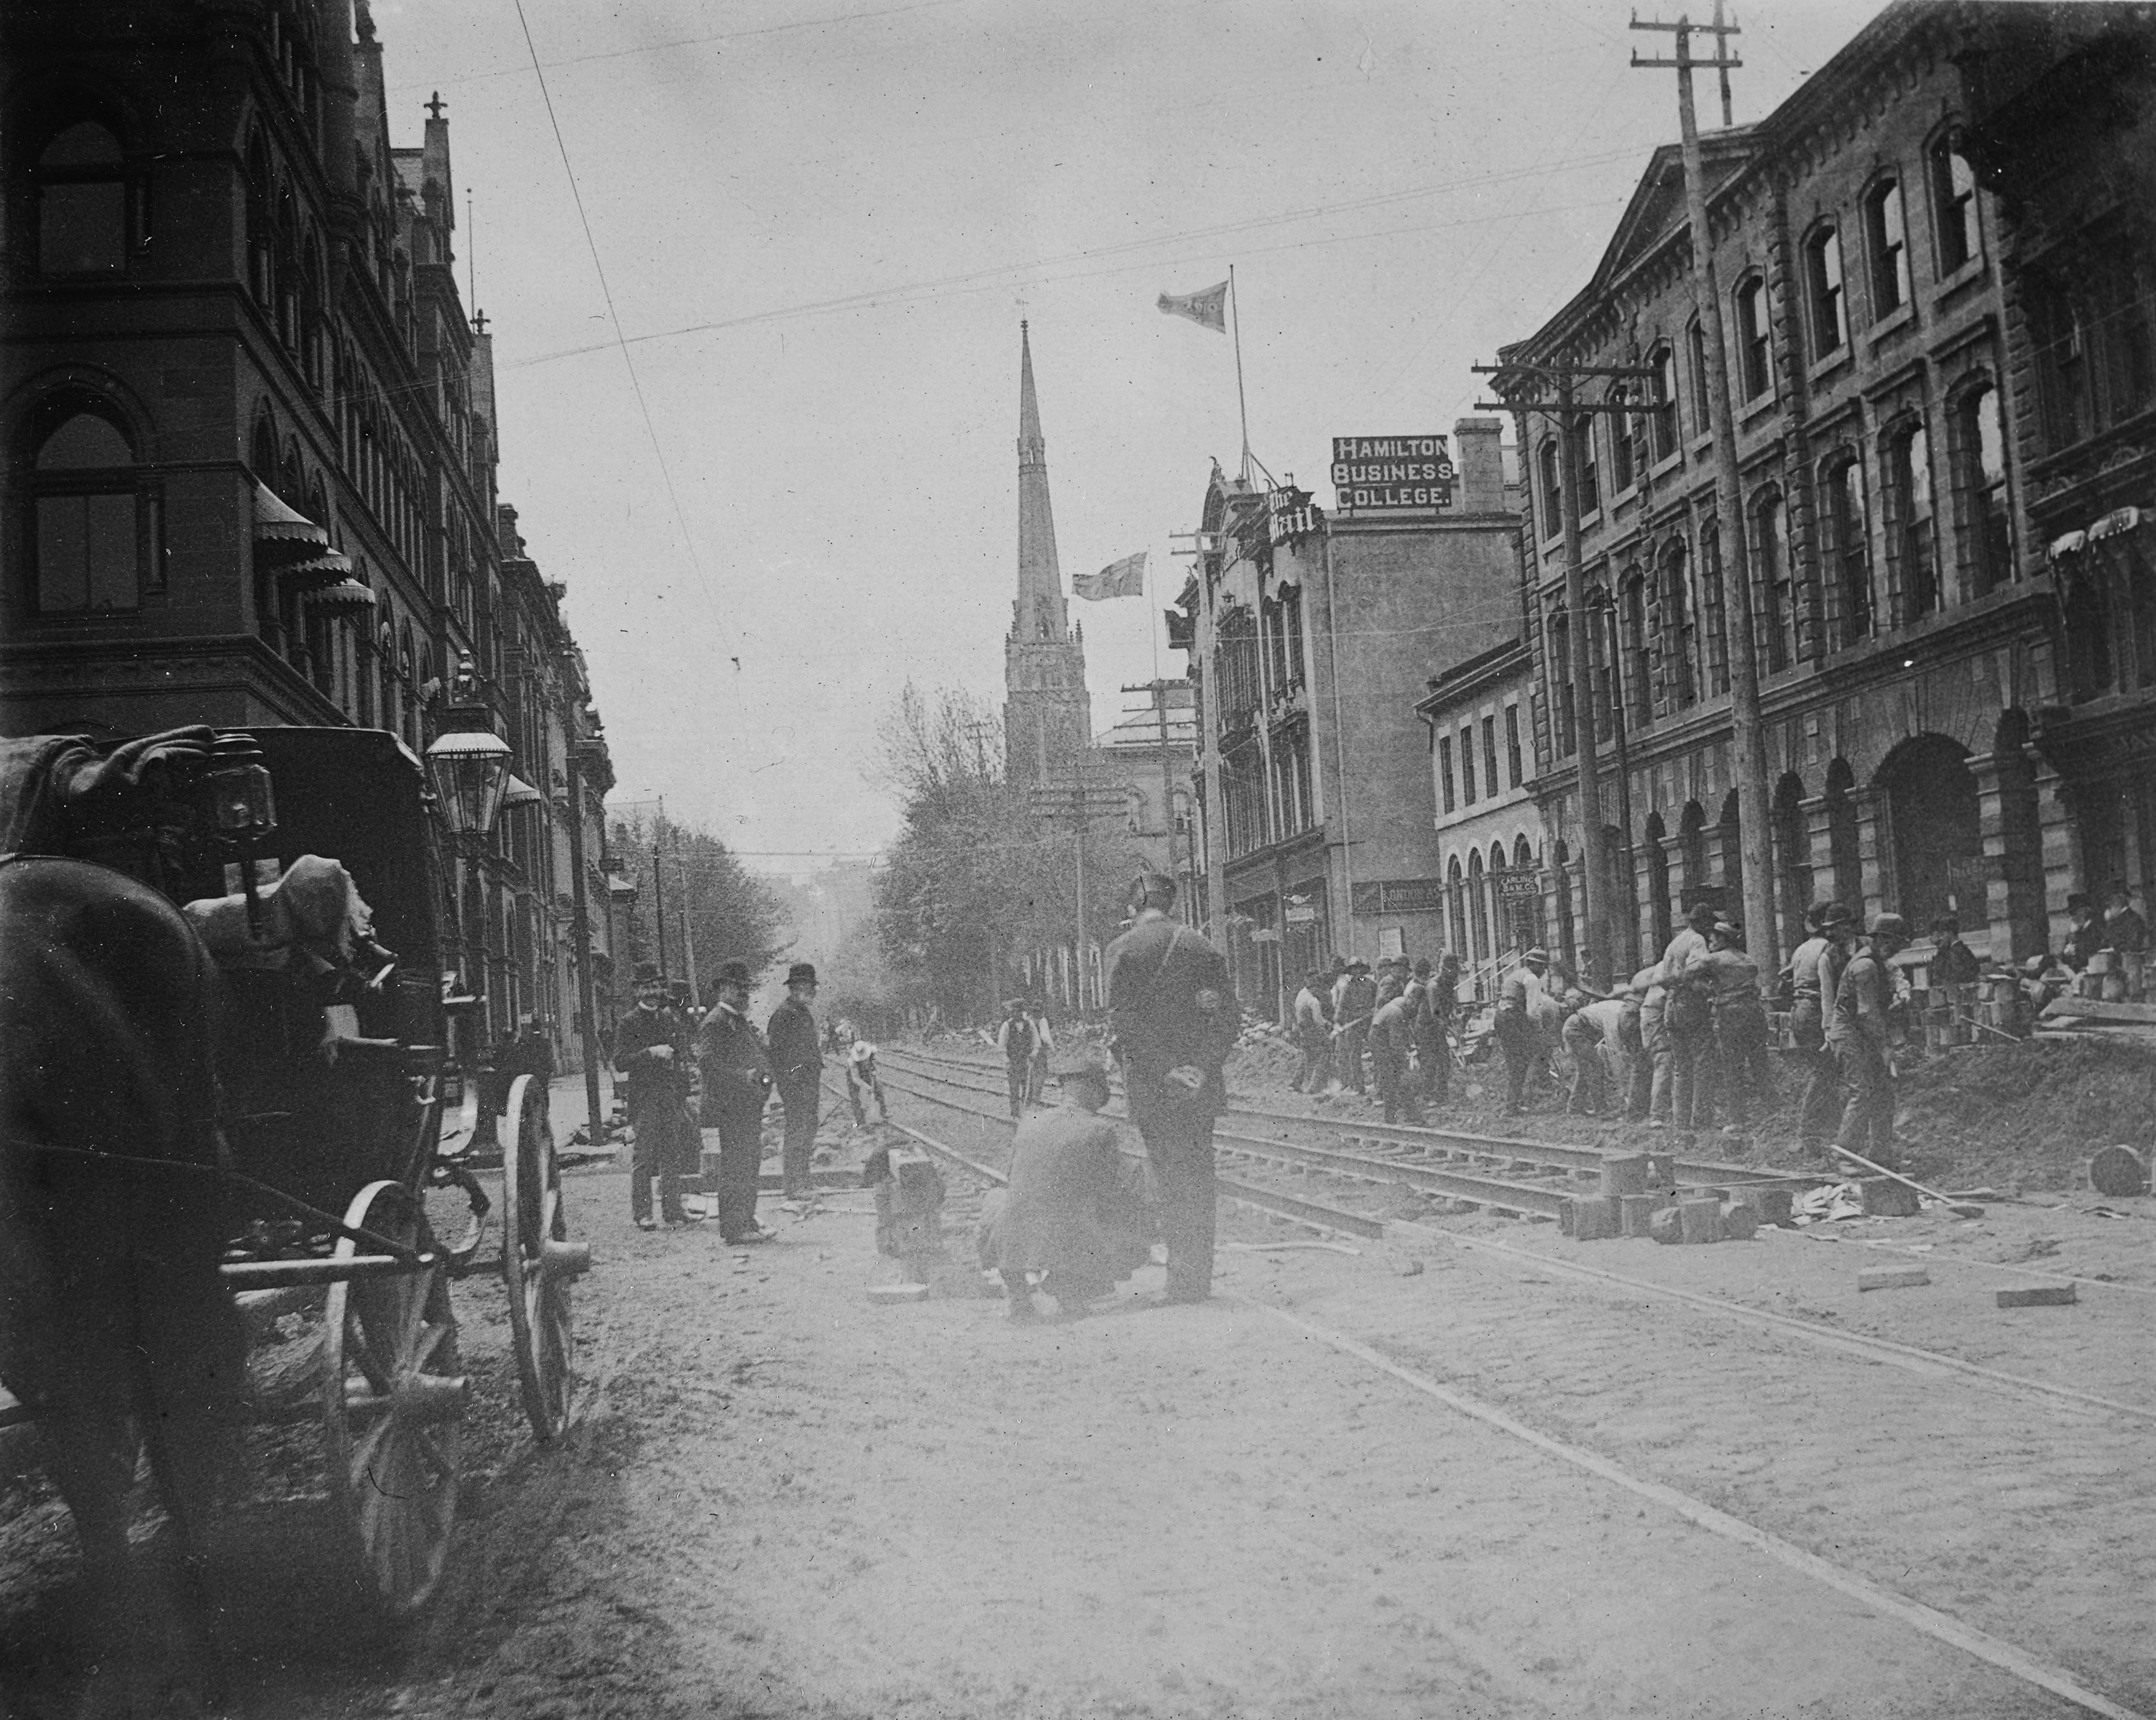 HSR 111 after the Great Riot of 1906.